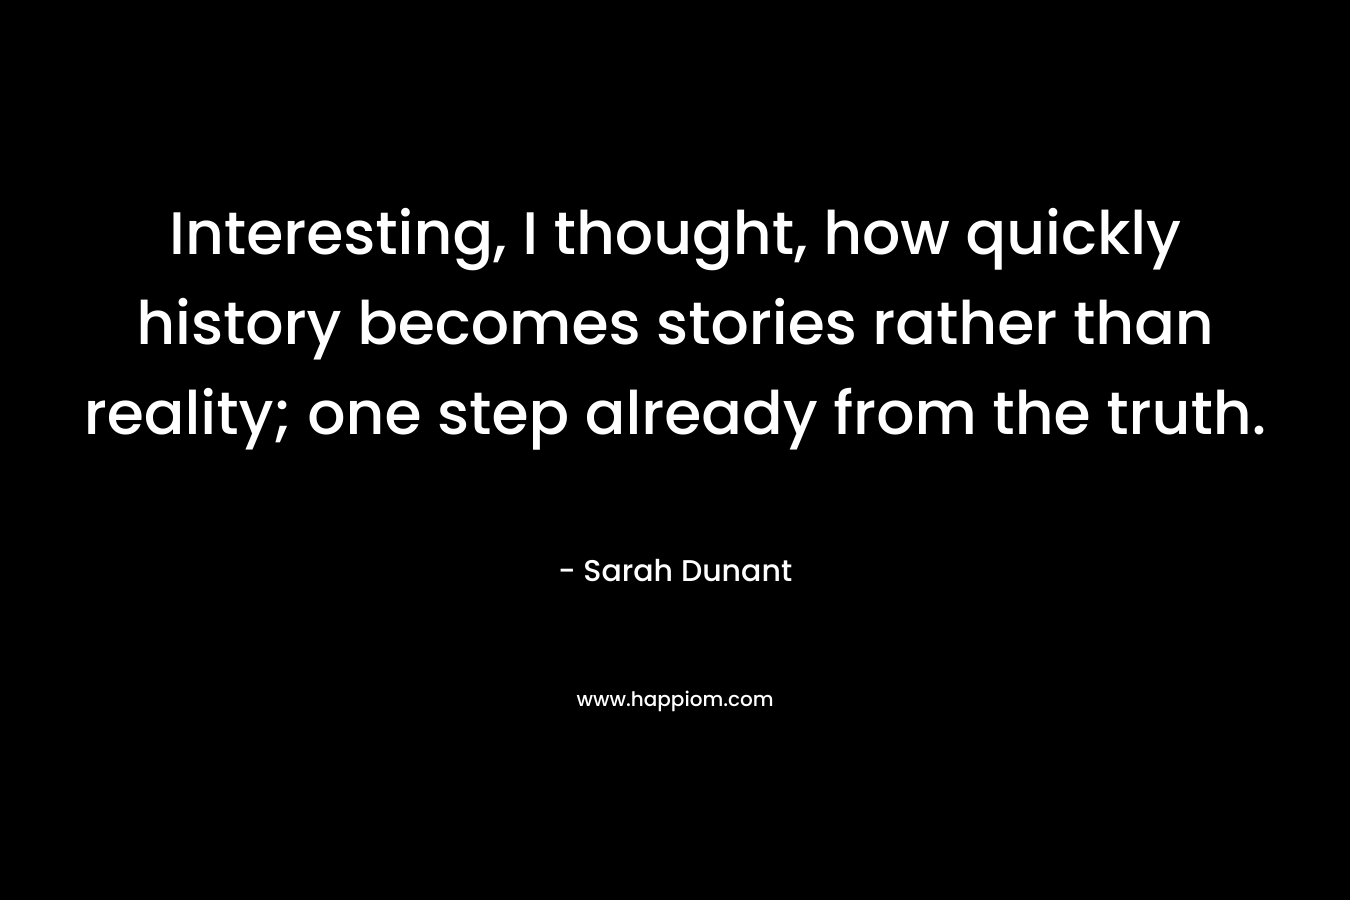 Interesting, I thought, how quickly history becomes stories rather than reality; one step already from the truth. – Sarah Dunant